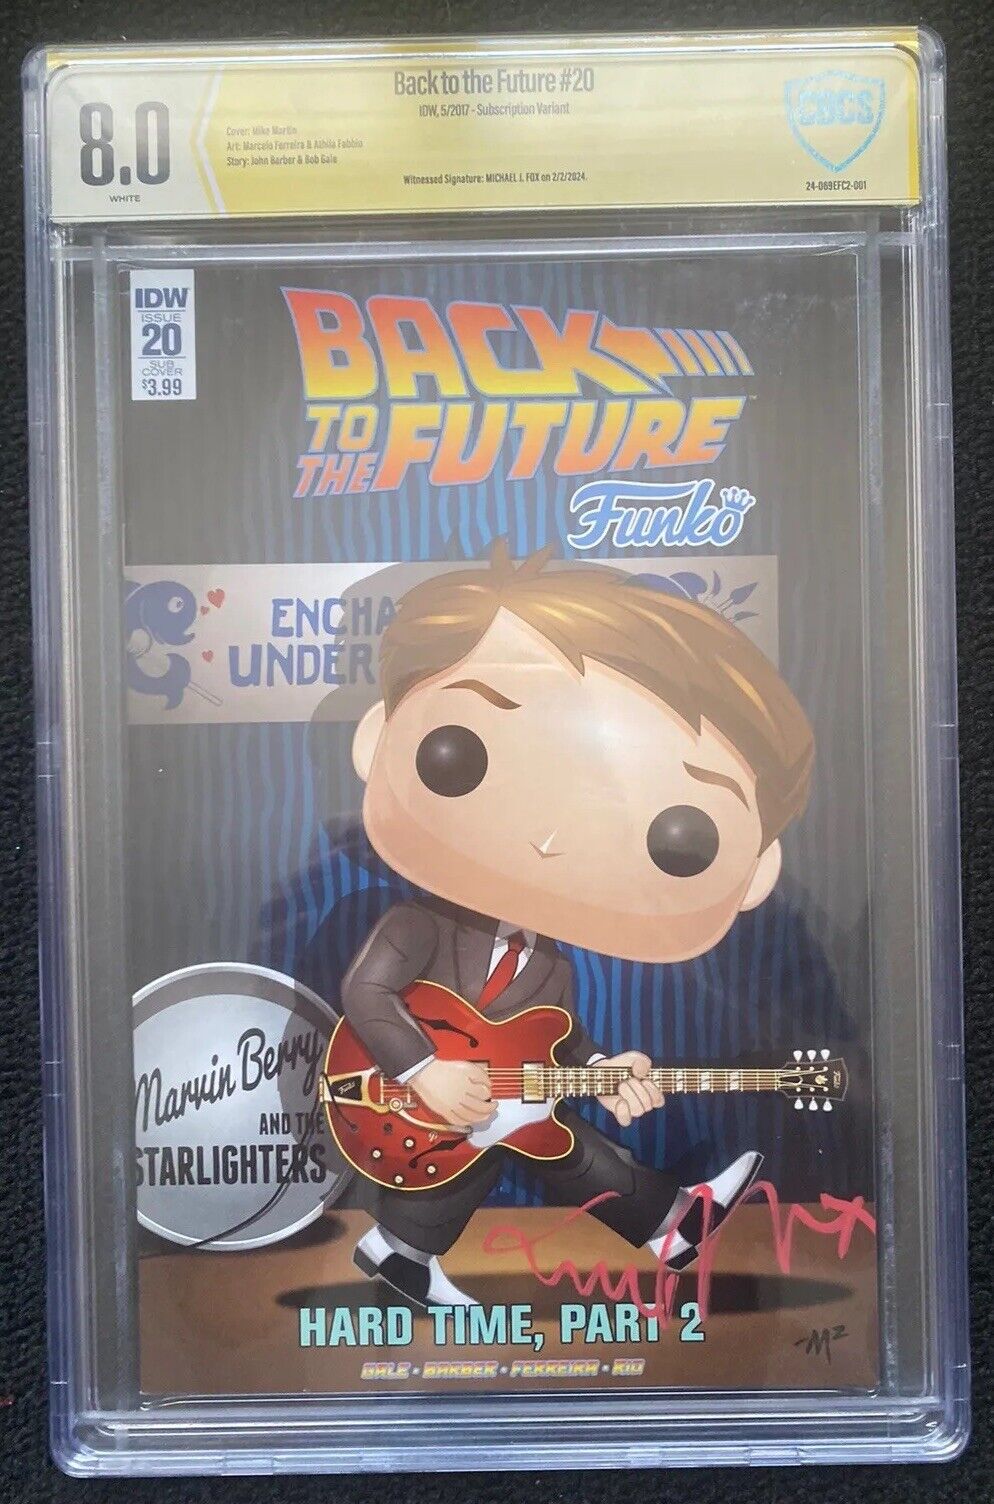 SIGNED MICHAEL J. FOX BACK TO THE FUTURE Comic CBCS Witnessed IDW Funko Auto